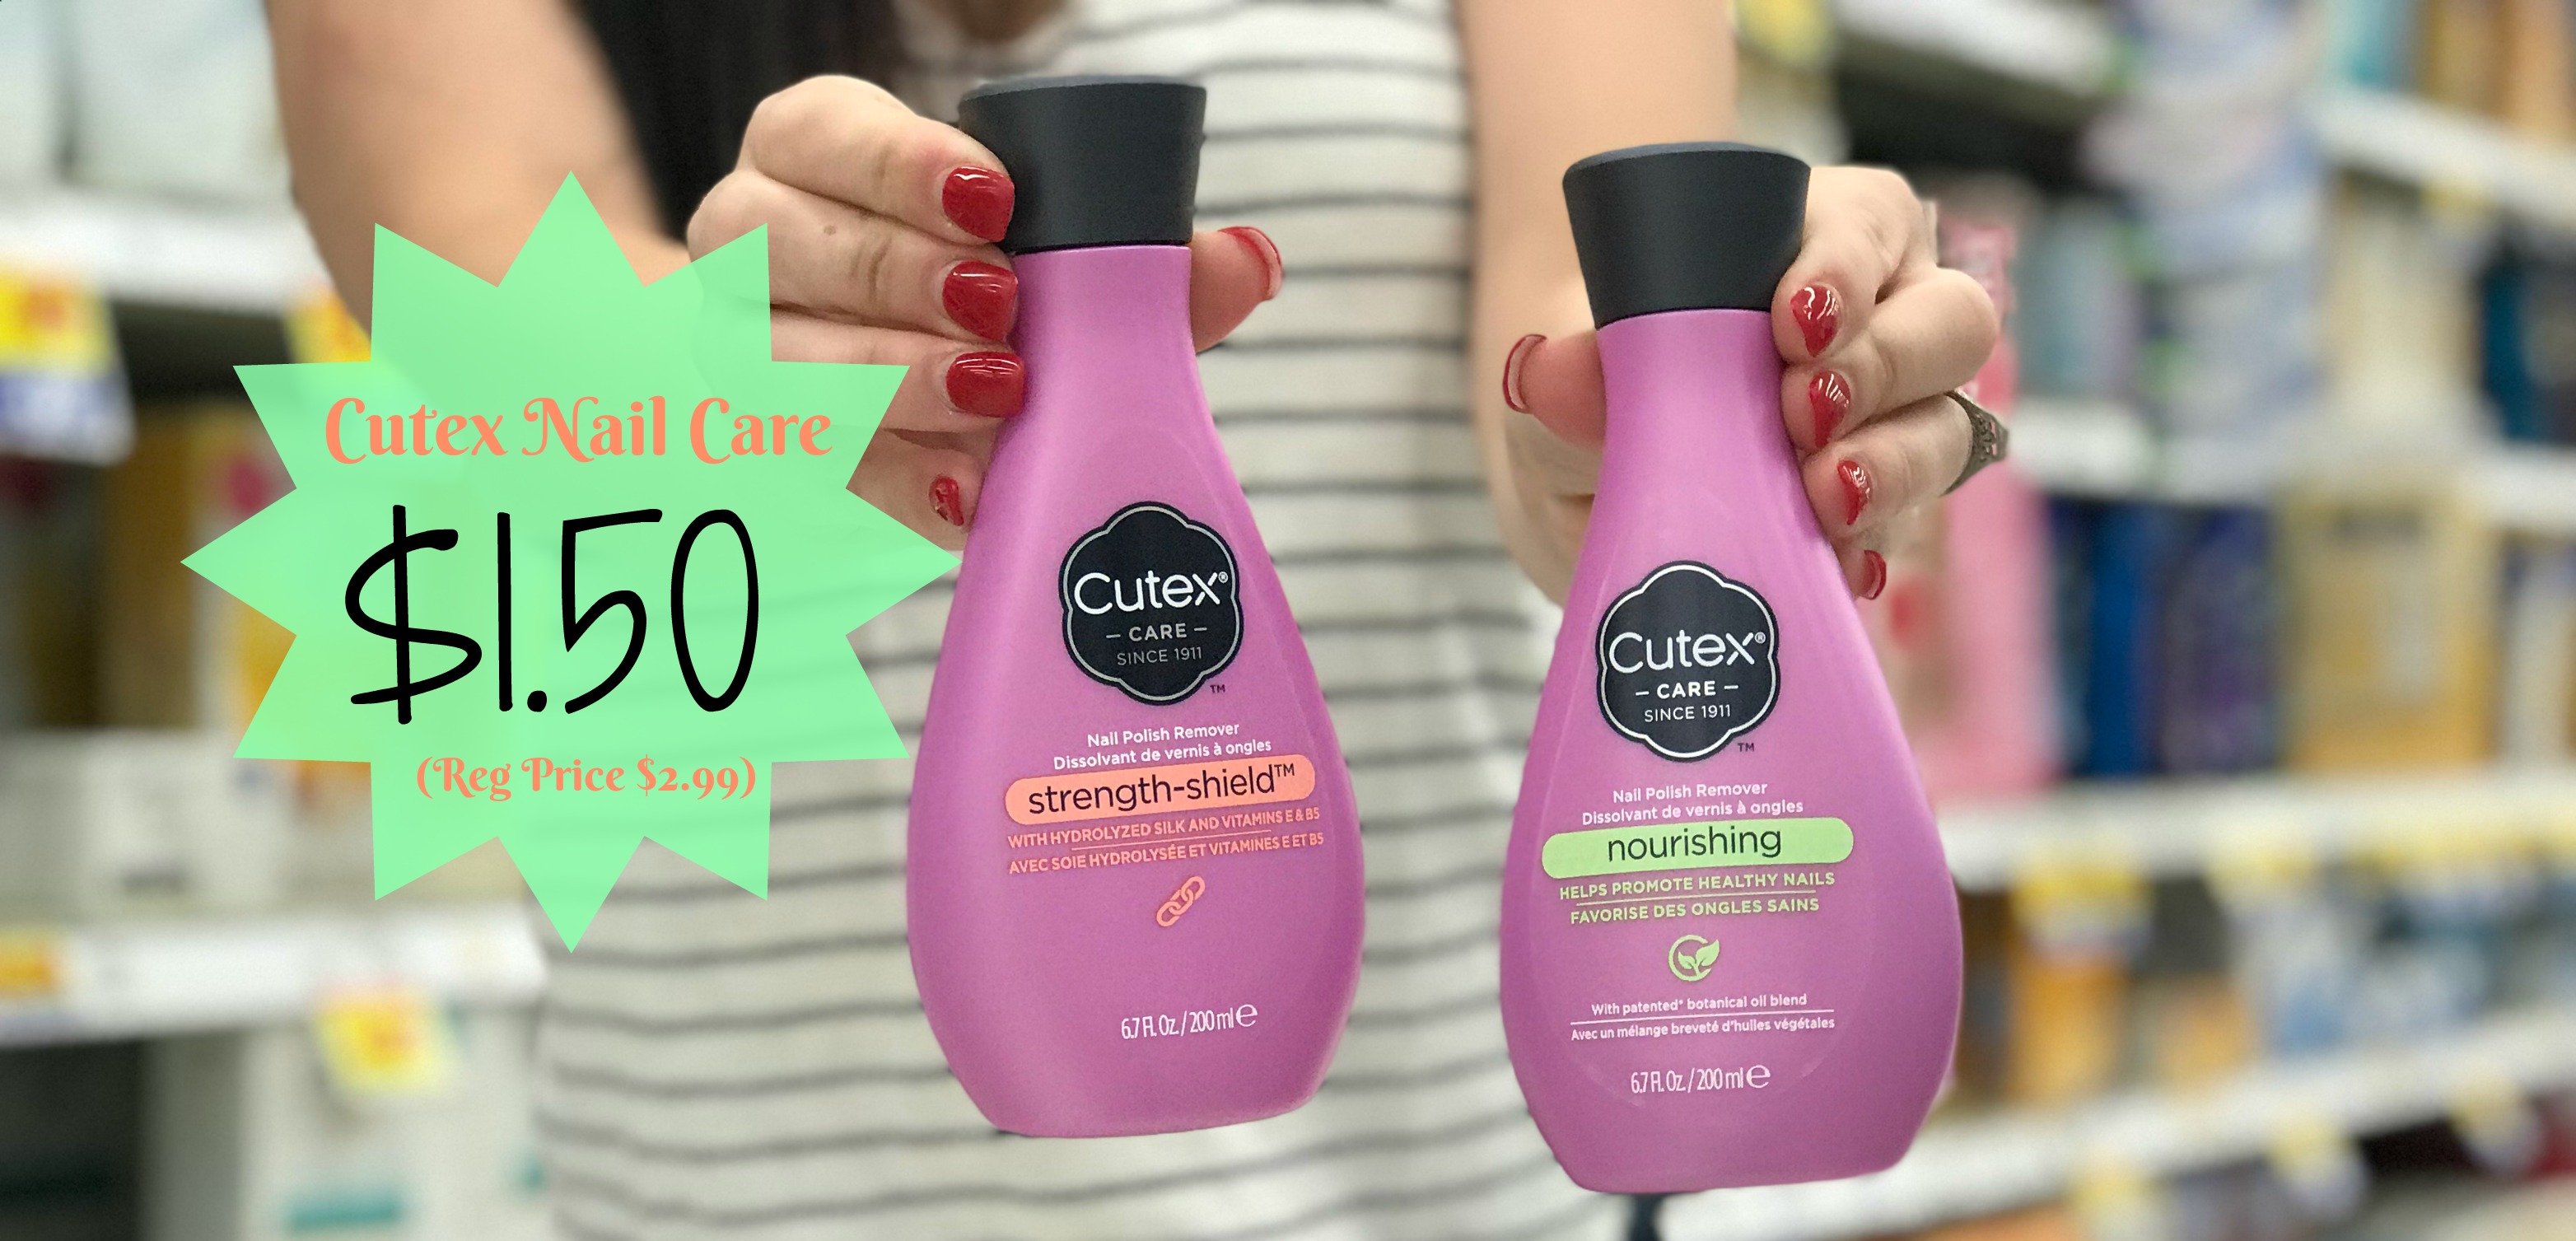 Cutex Nourishing Nail Polish Remover - 10.1 fl oz | ✨Friday Night Lights  Too Auctions✨ Featuring Holiday Decorations, Heaters, Contemporary  Lighting, Lithium Batteries, SecureBrite, Grills, Rice Cookers, Pillows,  Area Rugs, Weighted Blankets,